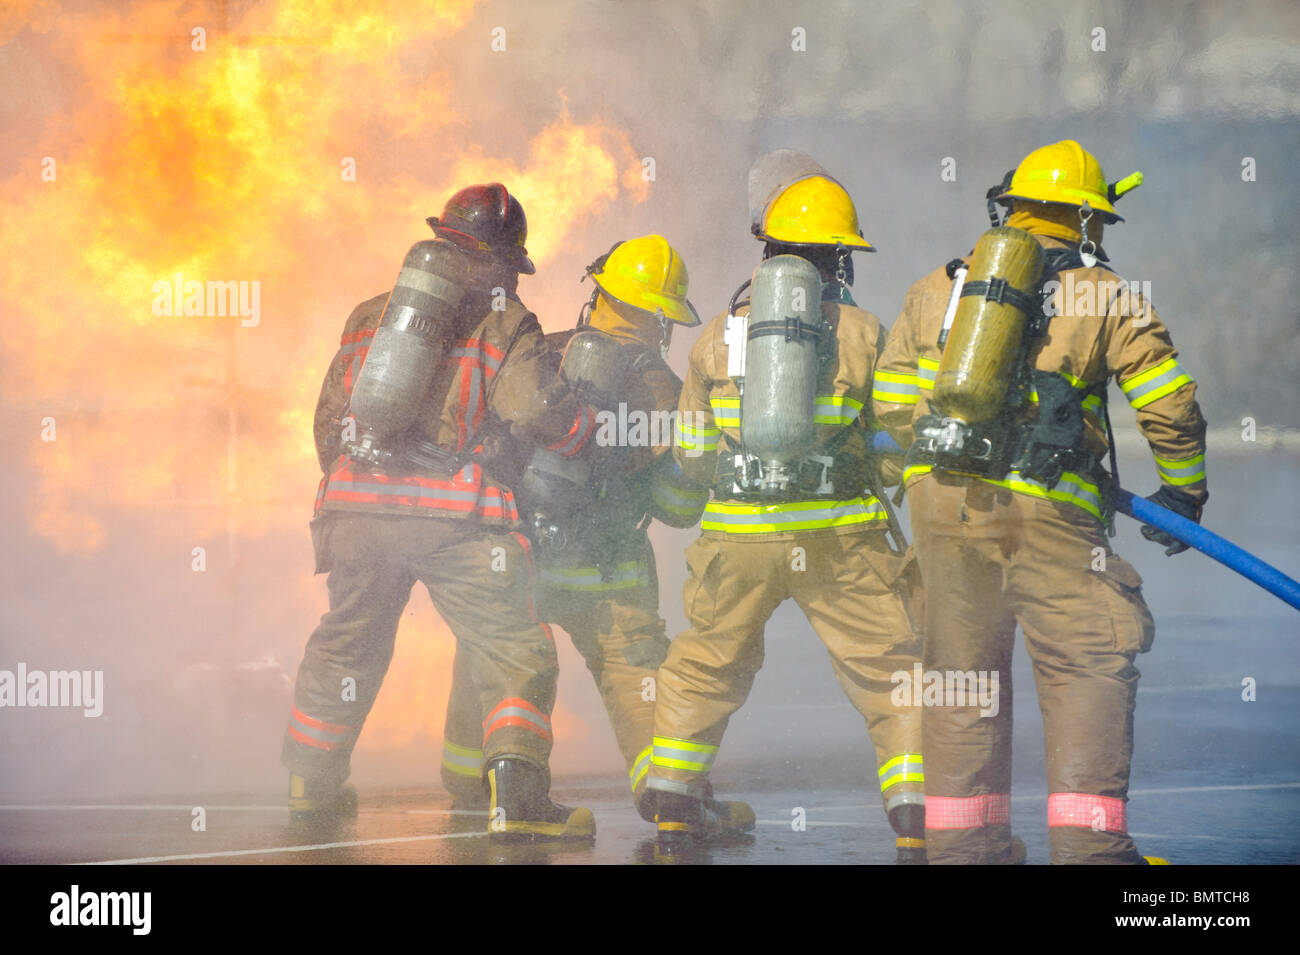 Directed by an officer in a red helmet, firefighters attack a propane fire during a training exercise. Stock Photo